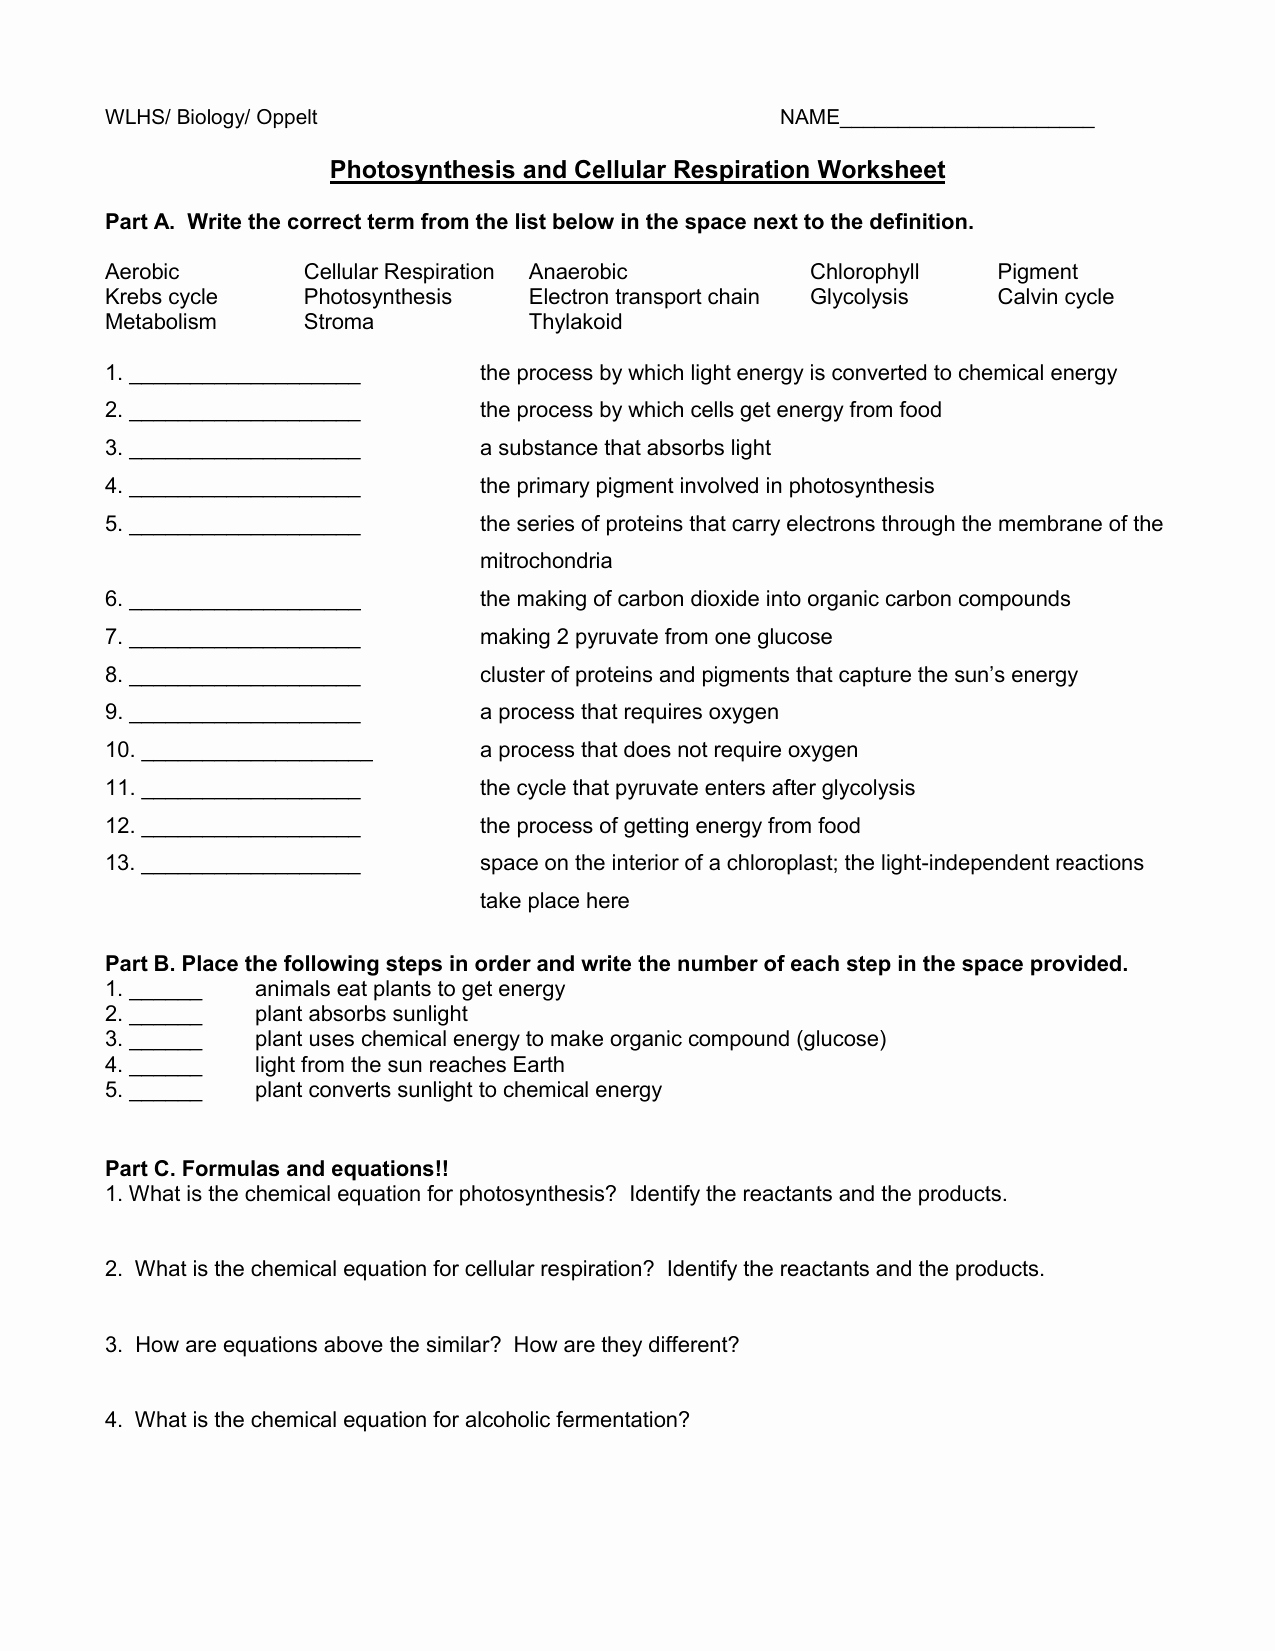 Photosynthesis and Respiration Worksheet Answers Fresh Synthesis and Cellular Respiration Worksheet Answers